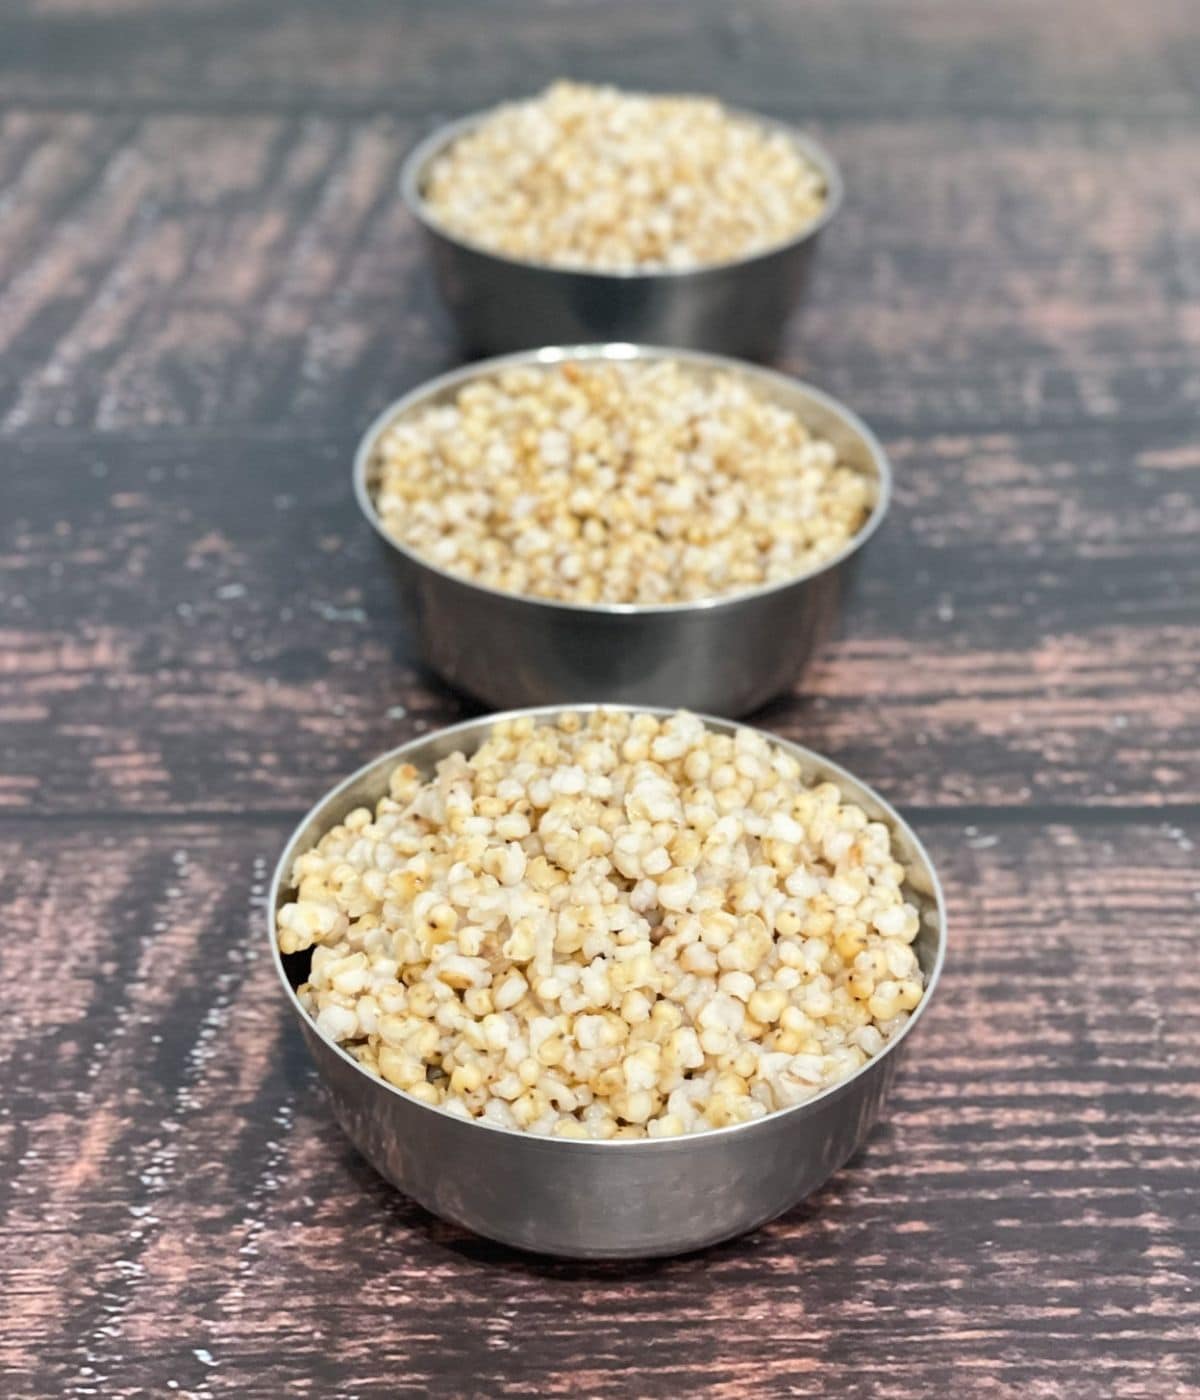 A stain less steel bowls are filled with cooked sorghum millet.